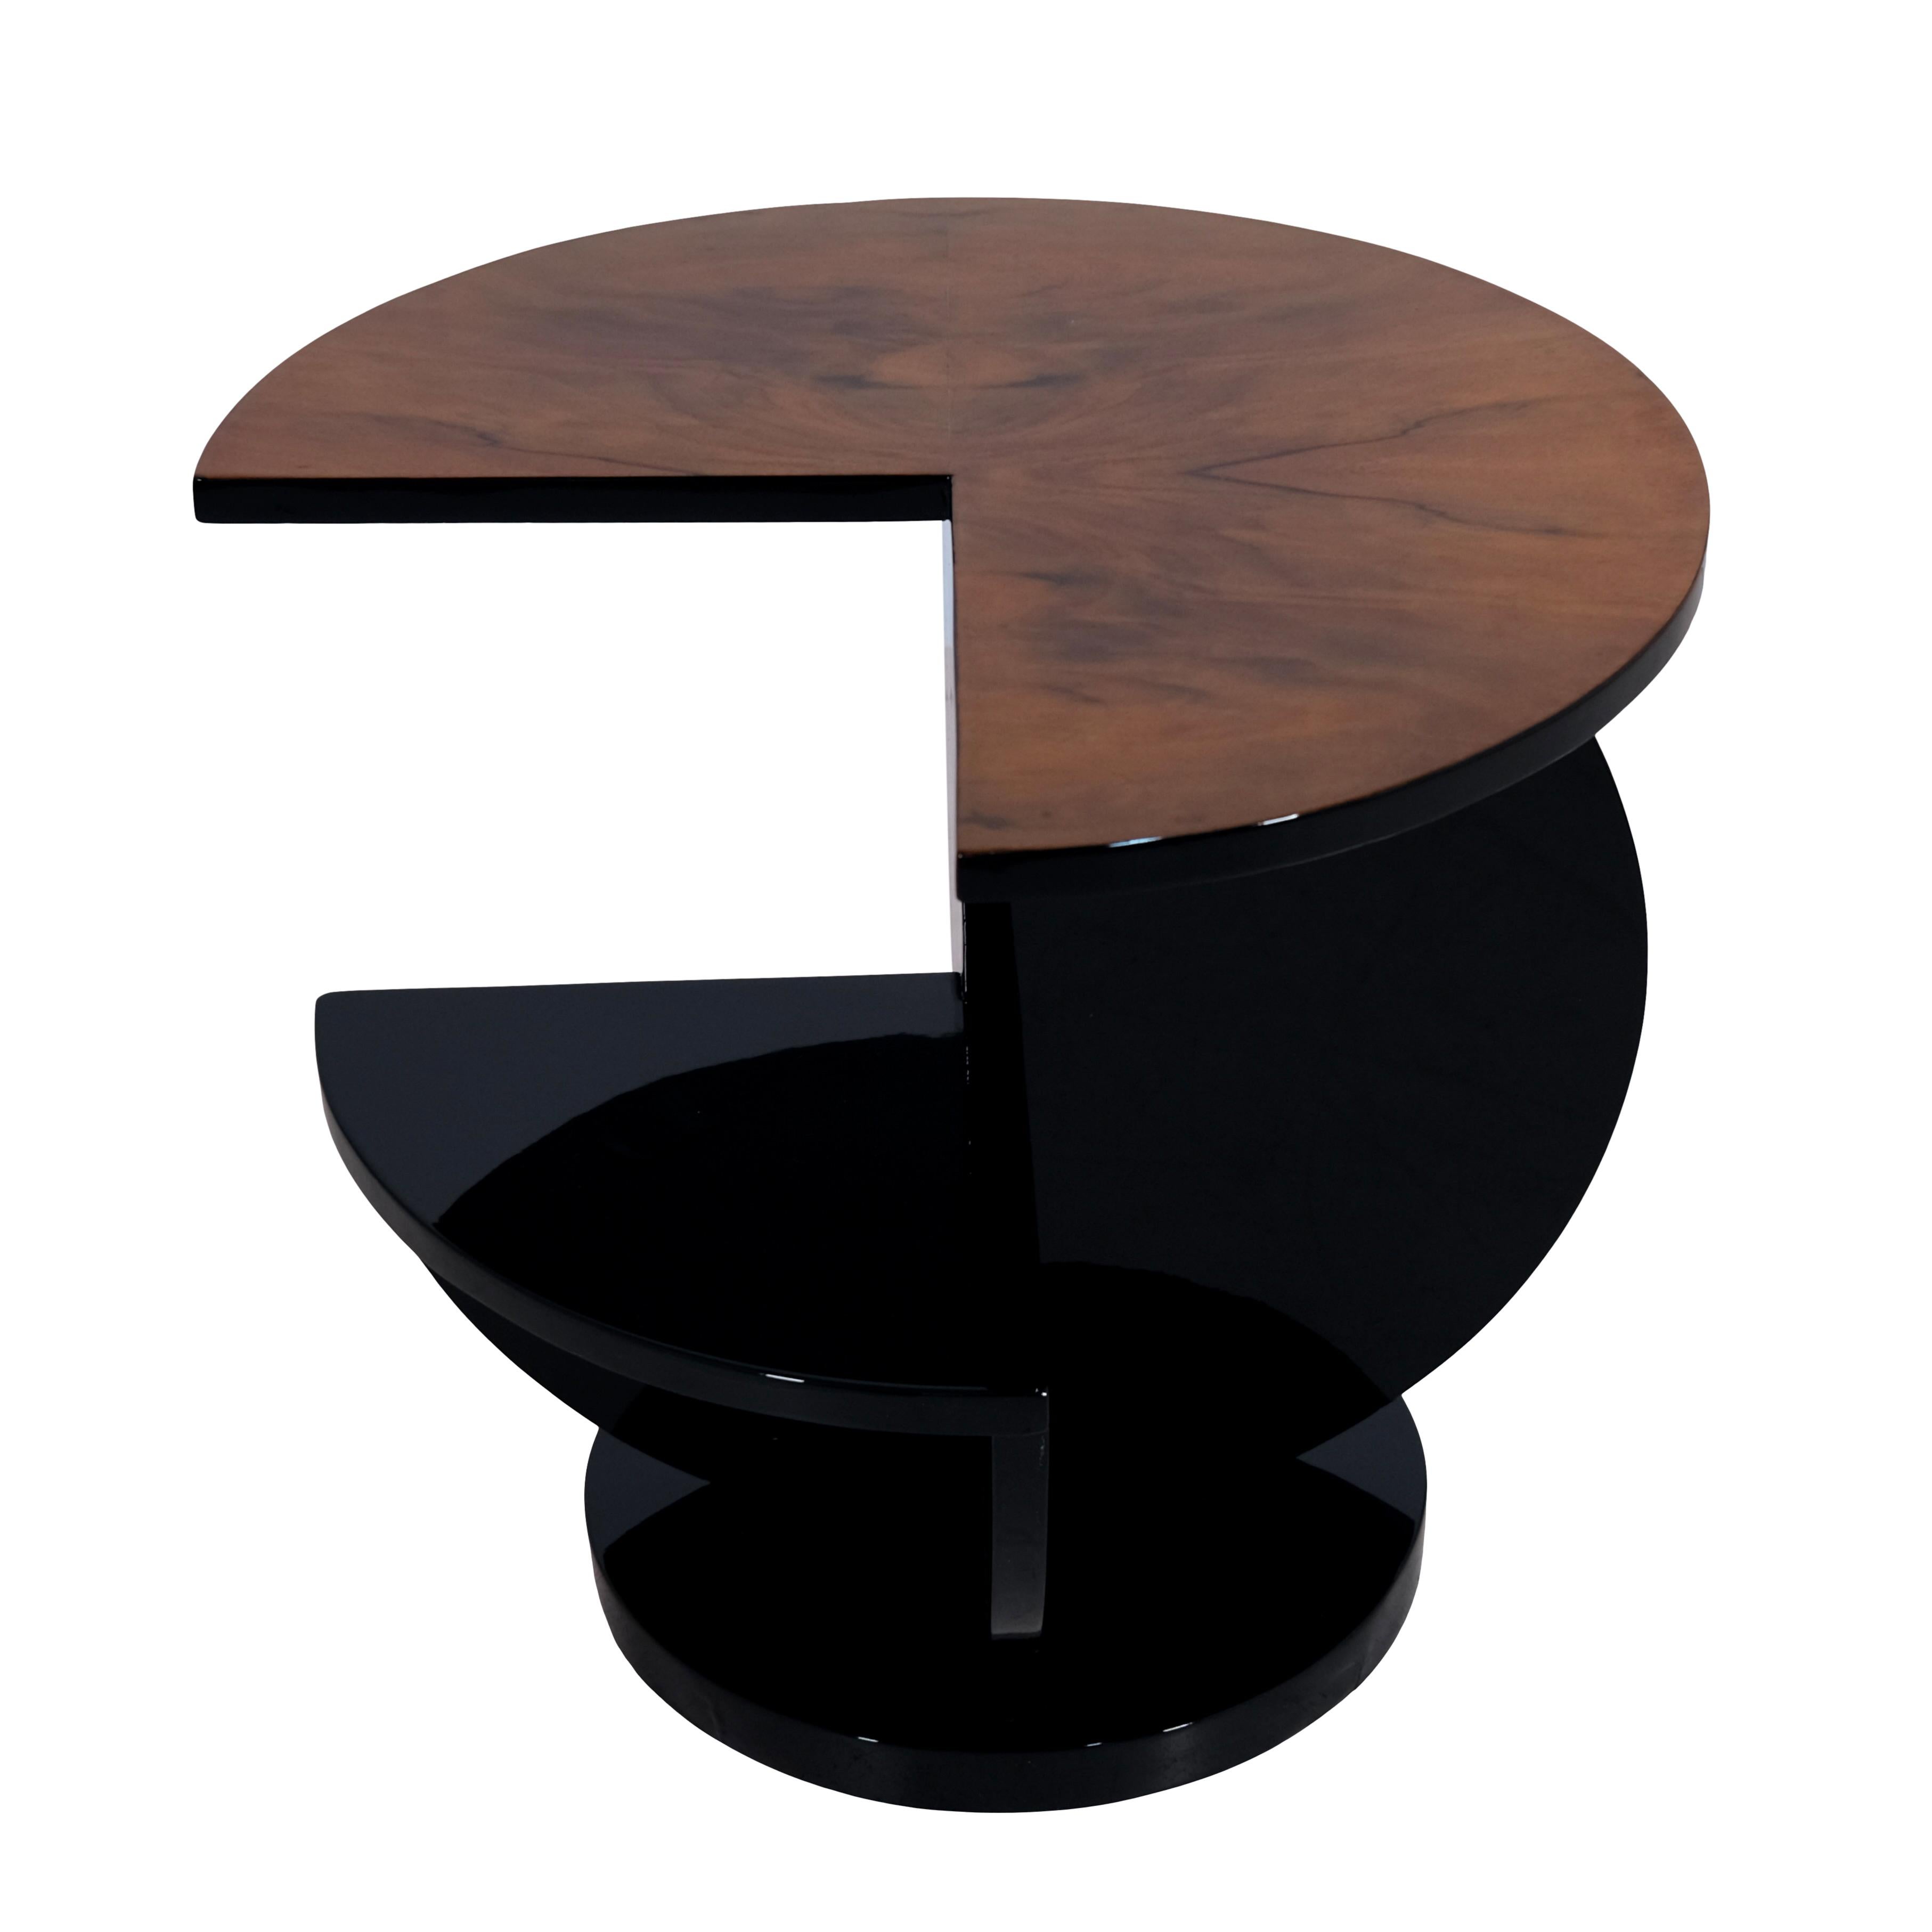 Lacquered Segmented 1930s French Art Deco Side Table in High Gloss Black and Nutwood For Sale